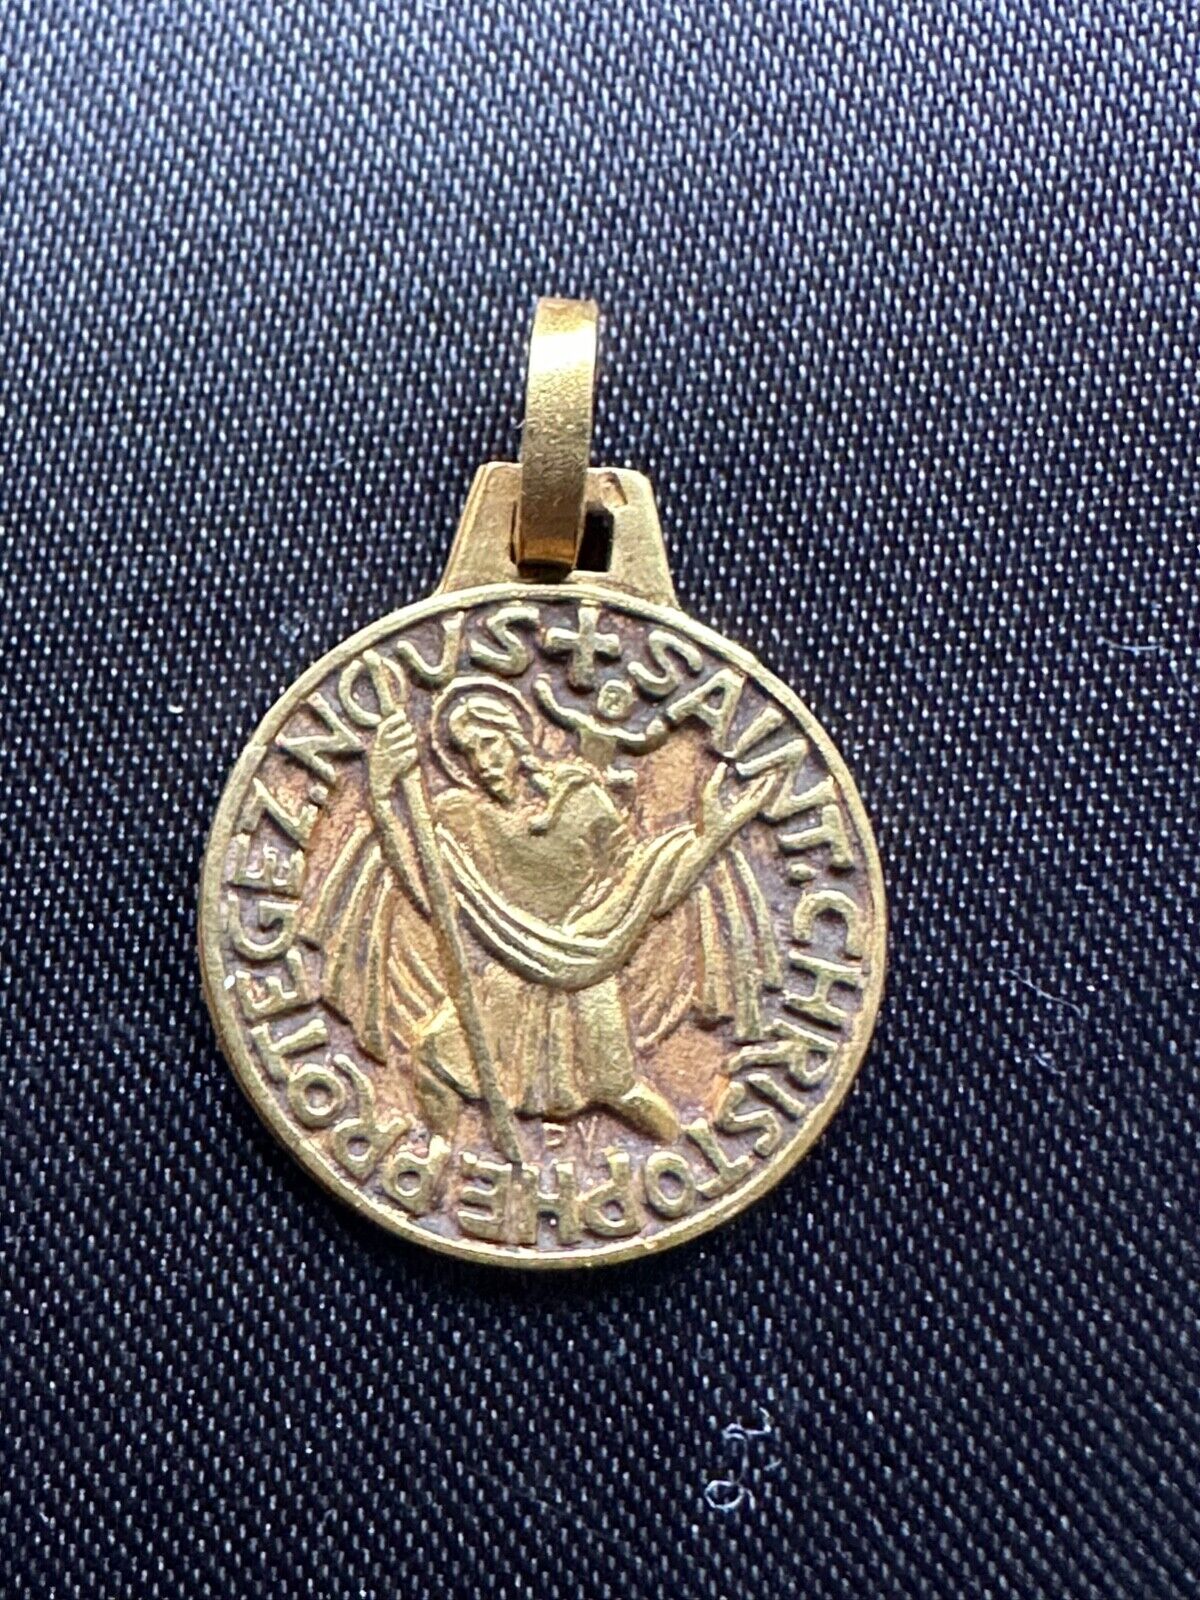 Antique Religious Gold plated medal -ST CHRISTOPHER - engraved Mita 1858-1958